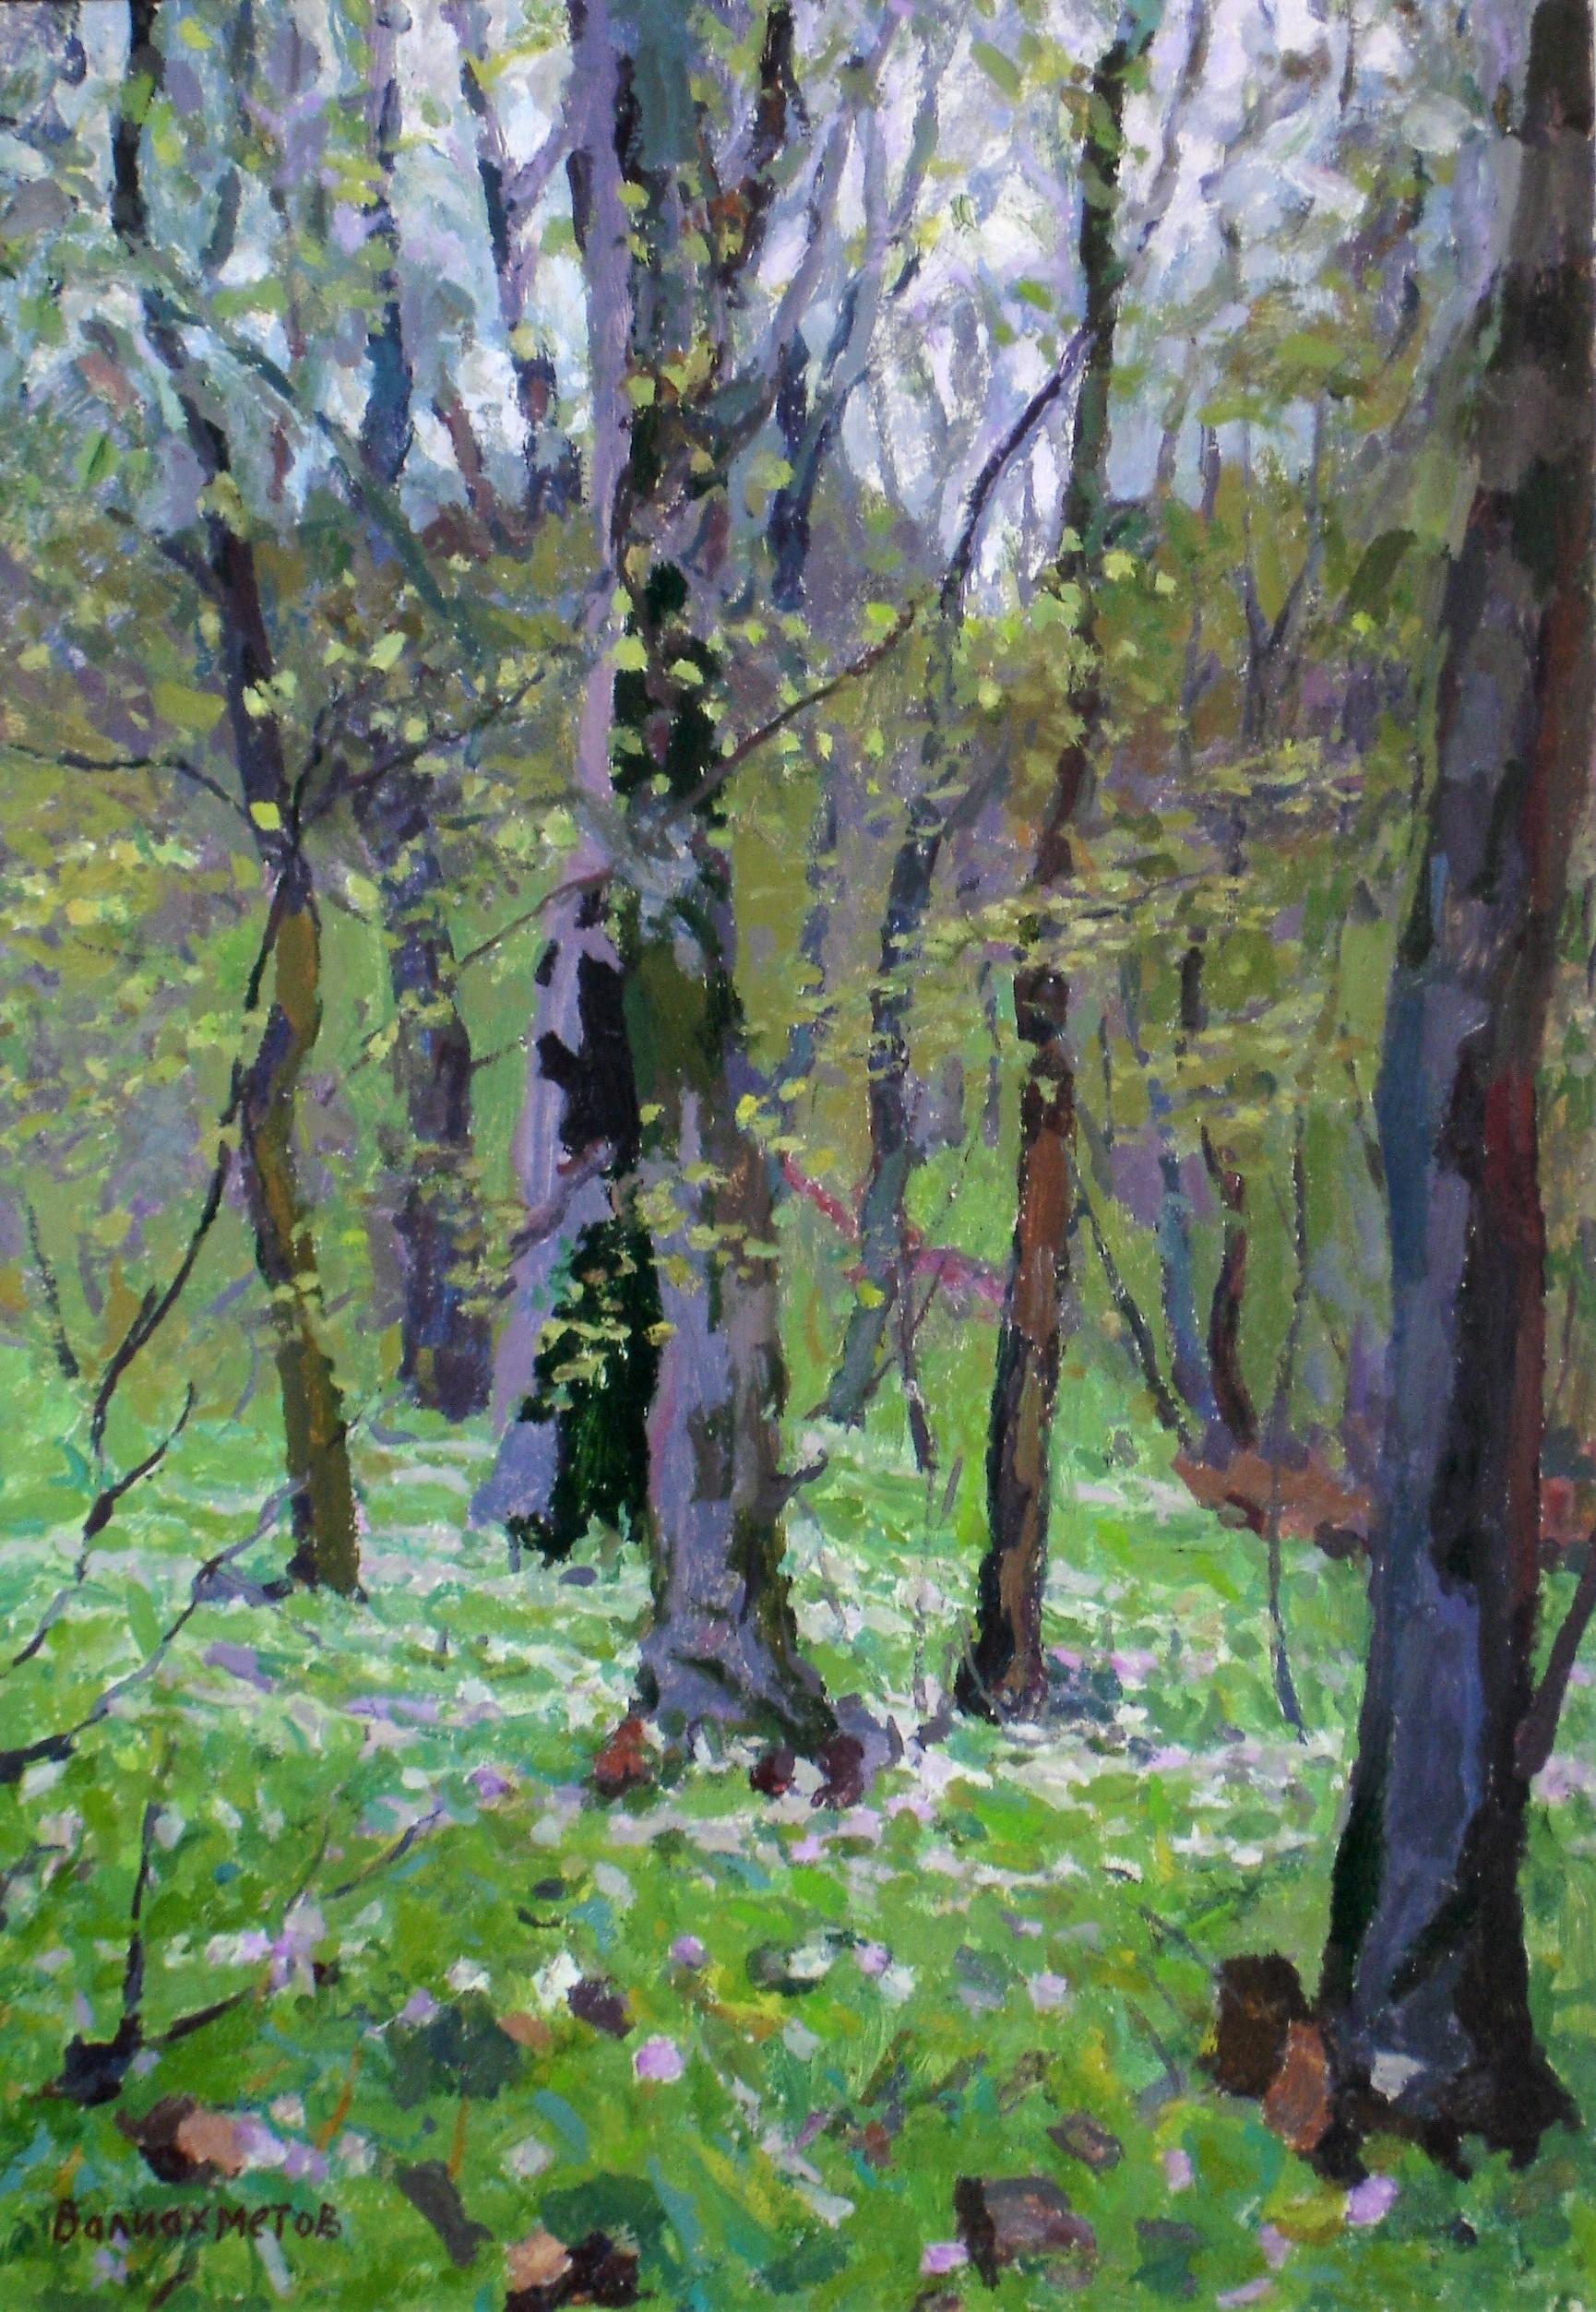 Figurative Painting Valiahmetov Amir Hasnulovitch - Spring in the forest, 1978, huile sur carton, 50x35 cm